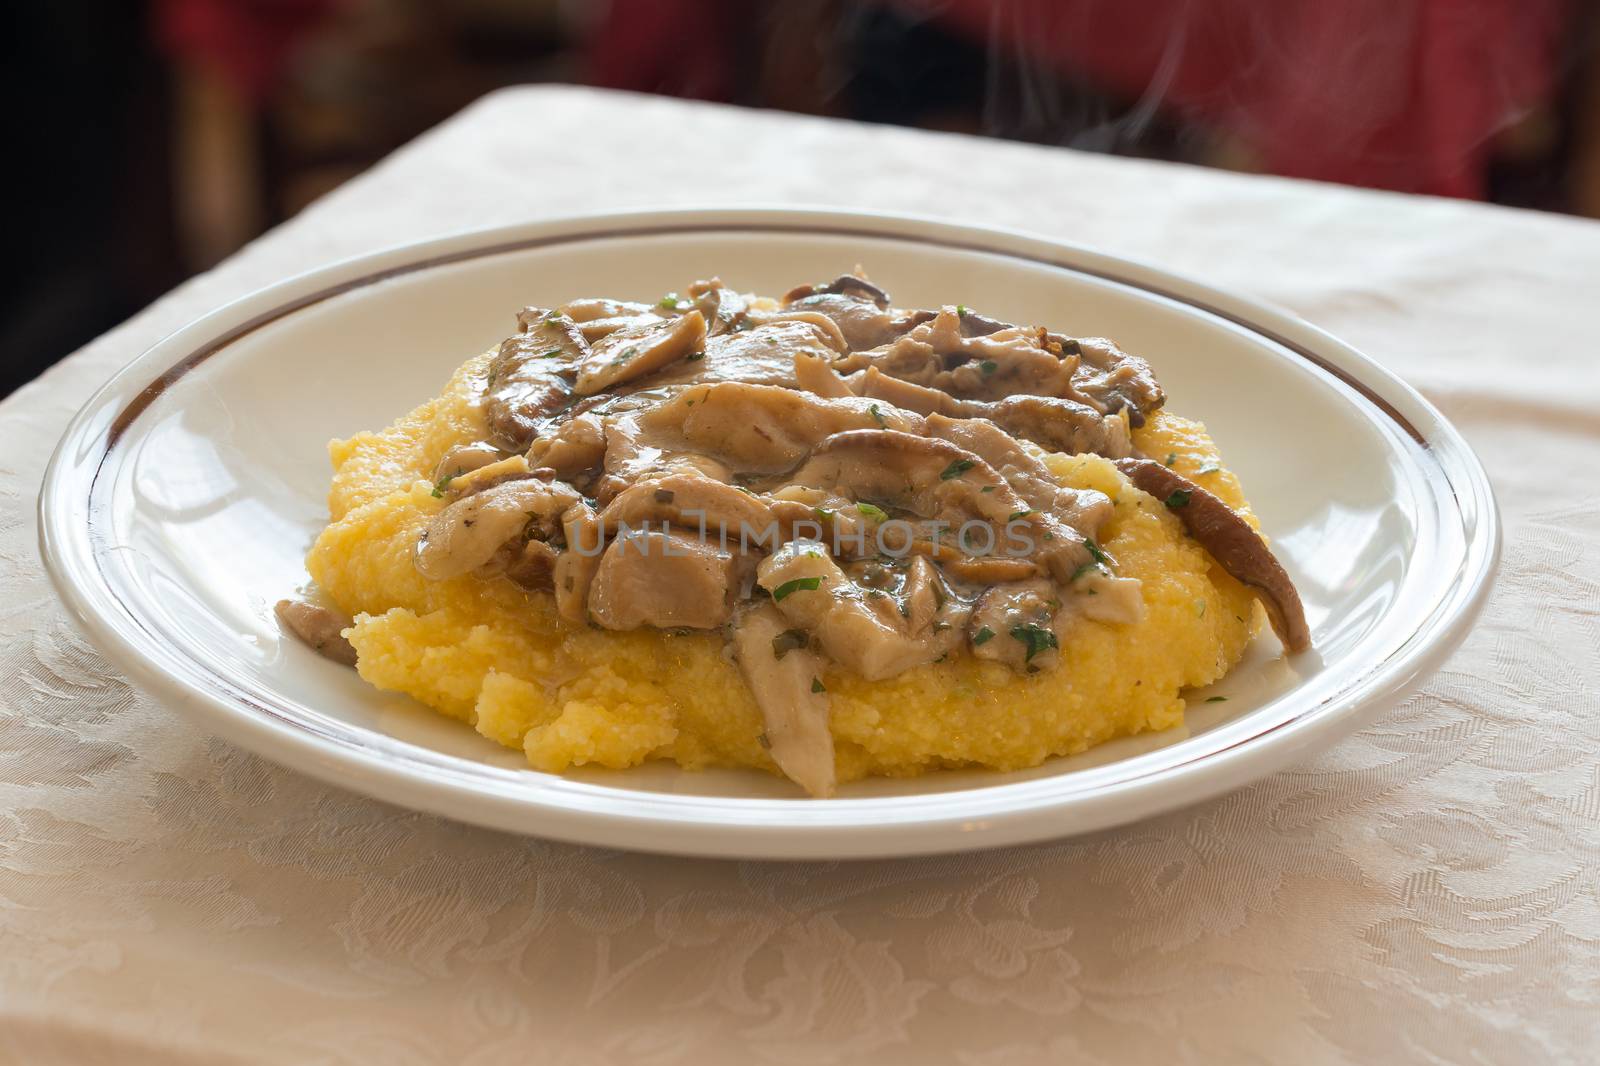 Pictured Polenta with mushrooms "Porcini" and herb.